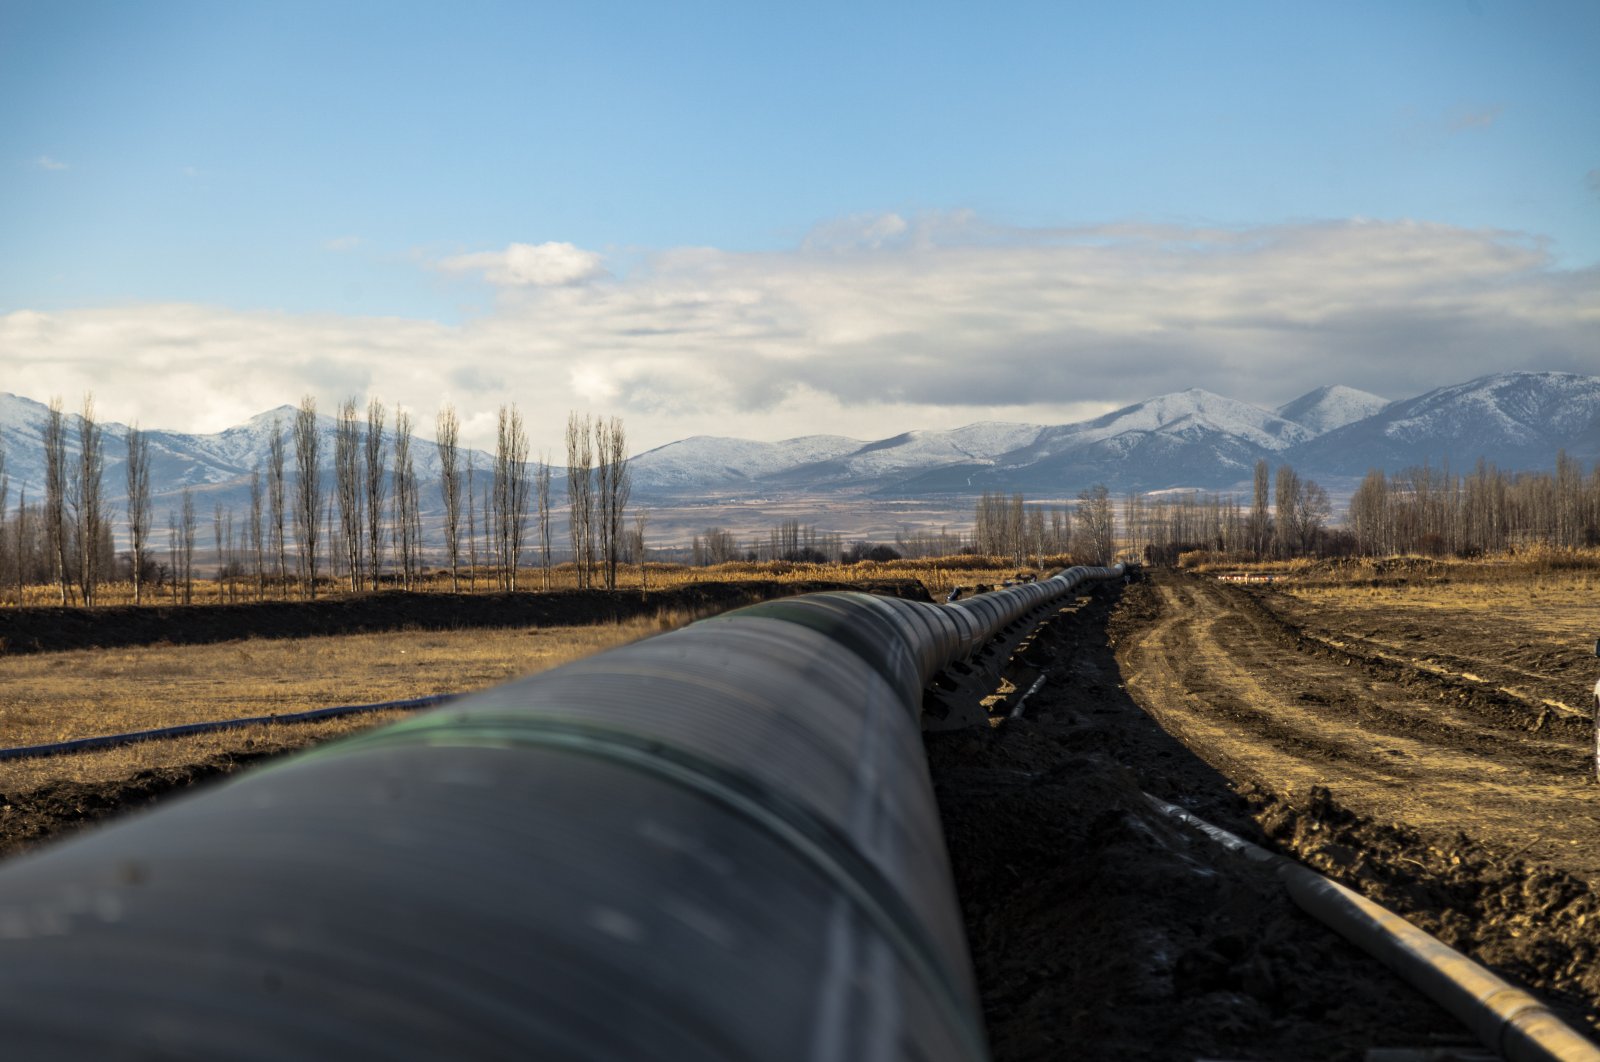 A part of Trans Anatolian Natural Gas Pipeline seen in this undated file photo. (Shutterstock Photo)